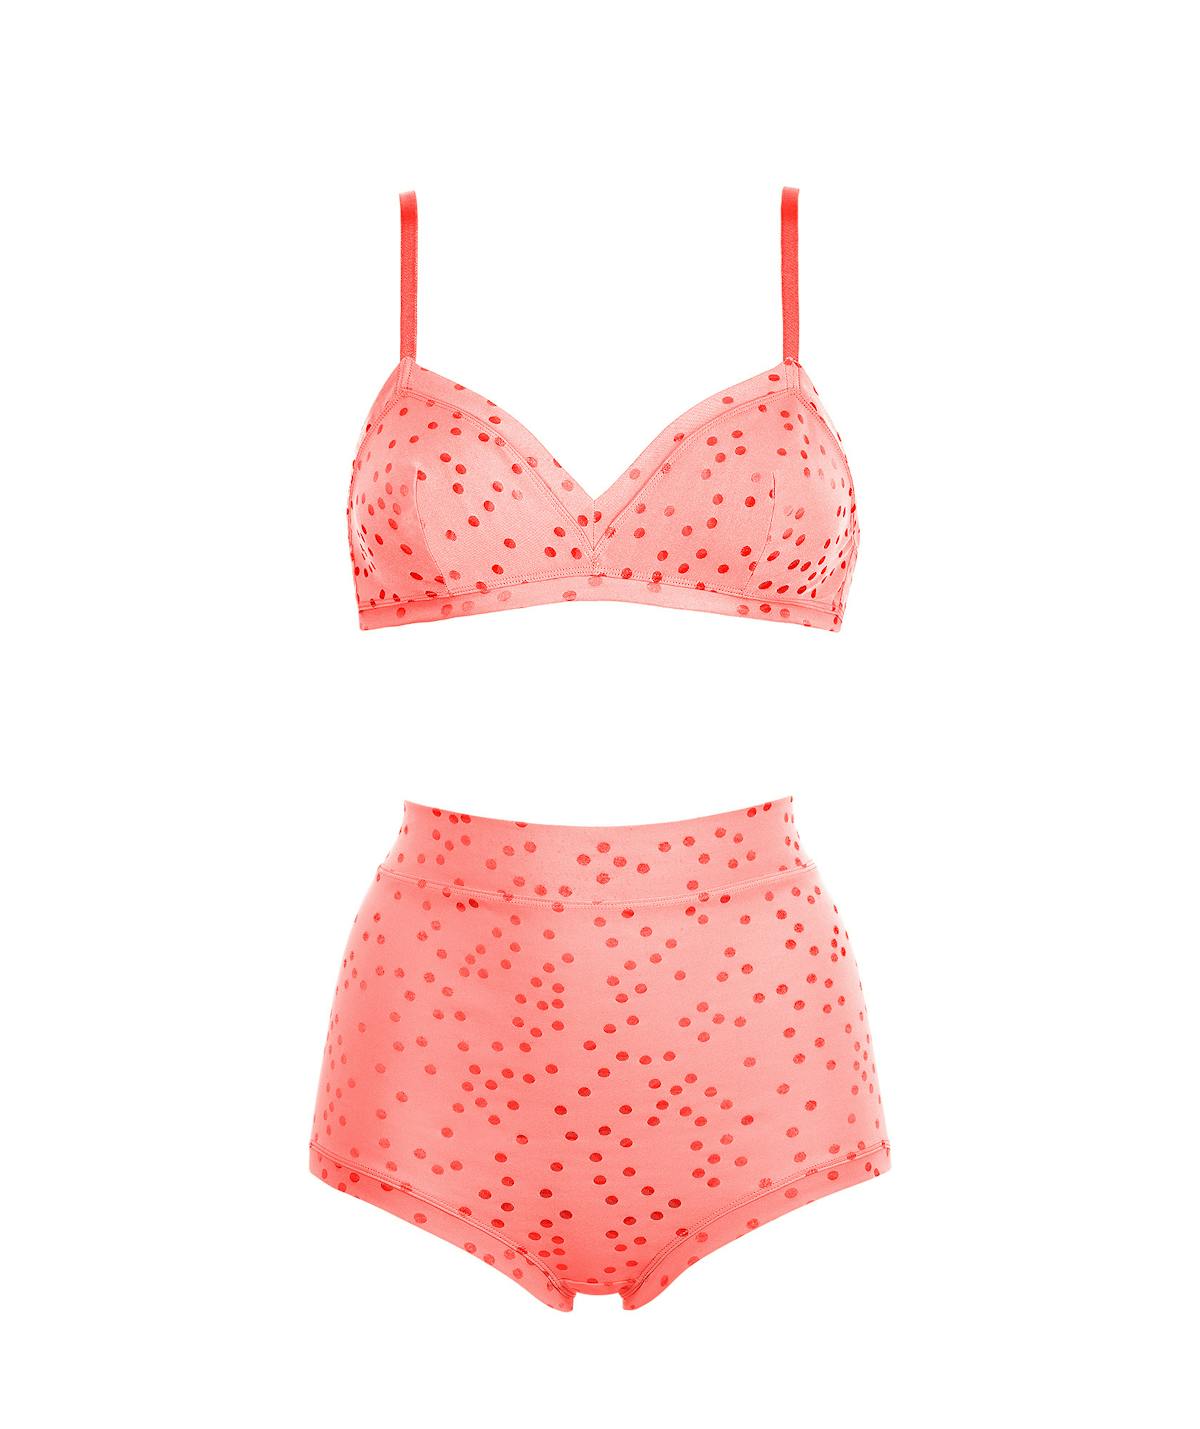 Best bright lingerie underwear sets and where to buy them online